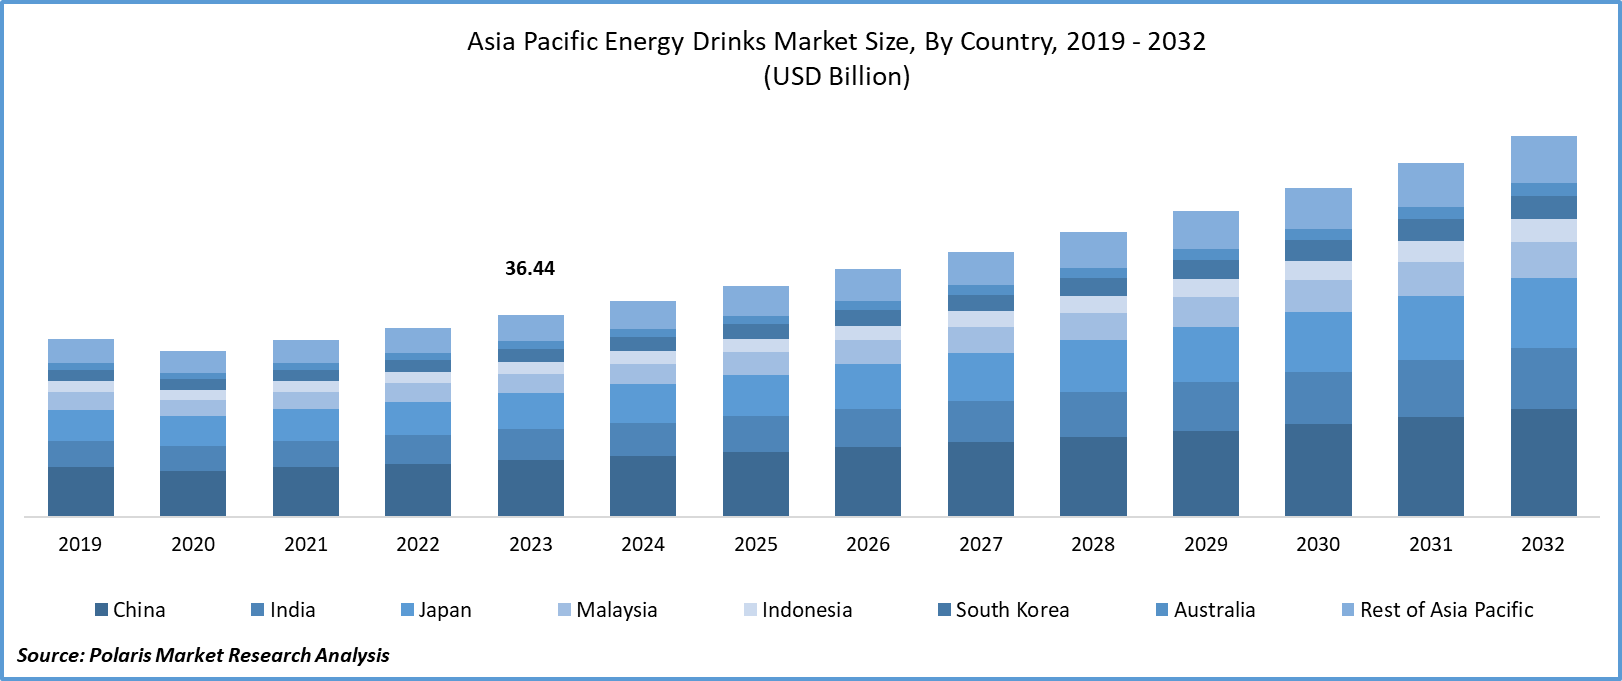 Asia Pacific Energy Drinks Market Size